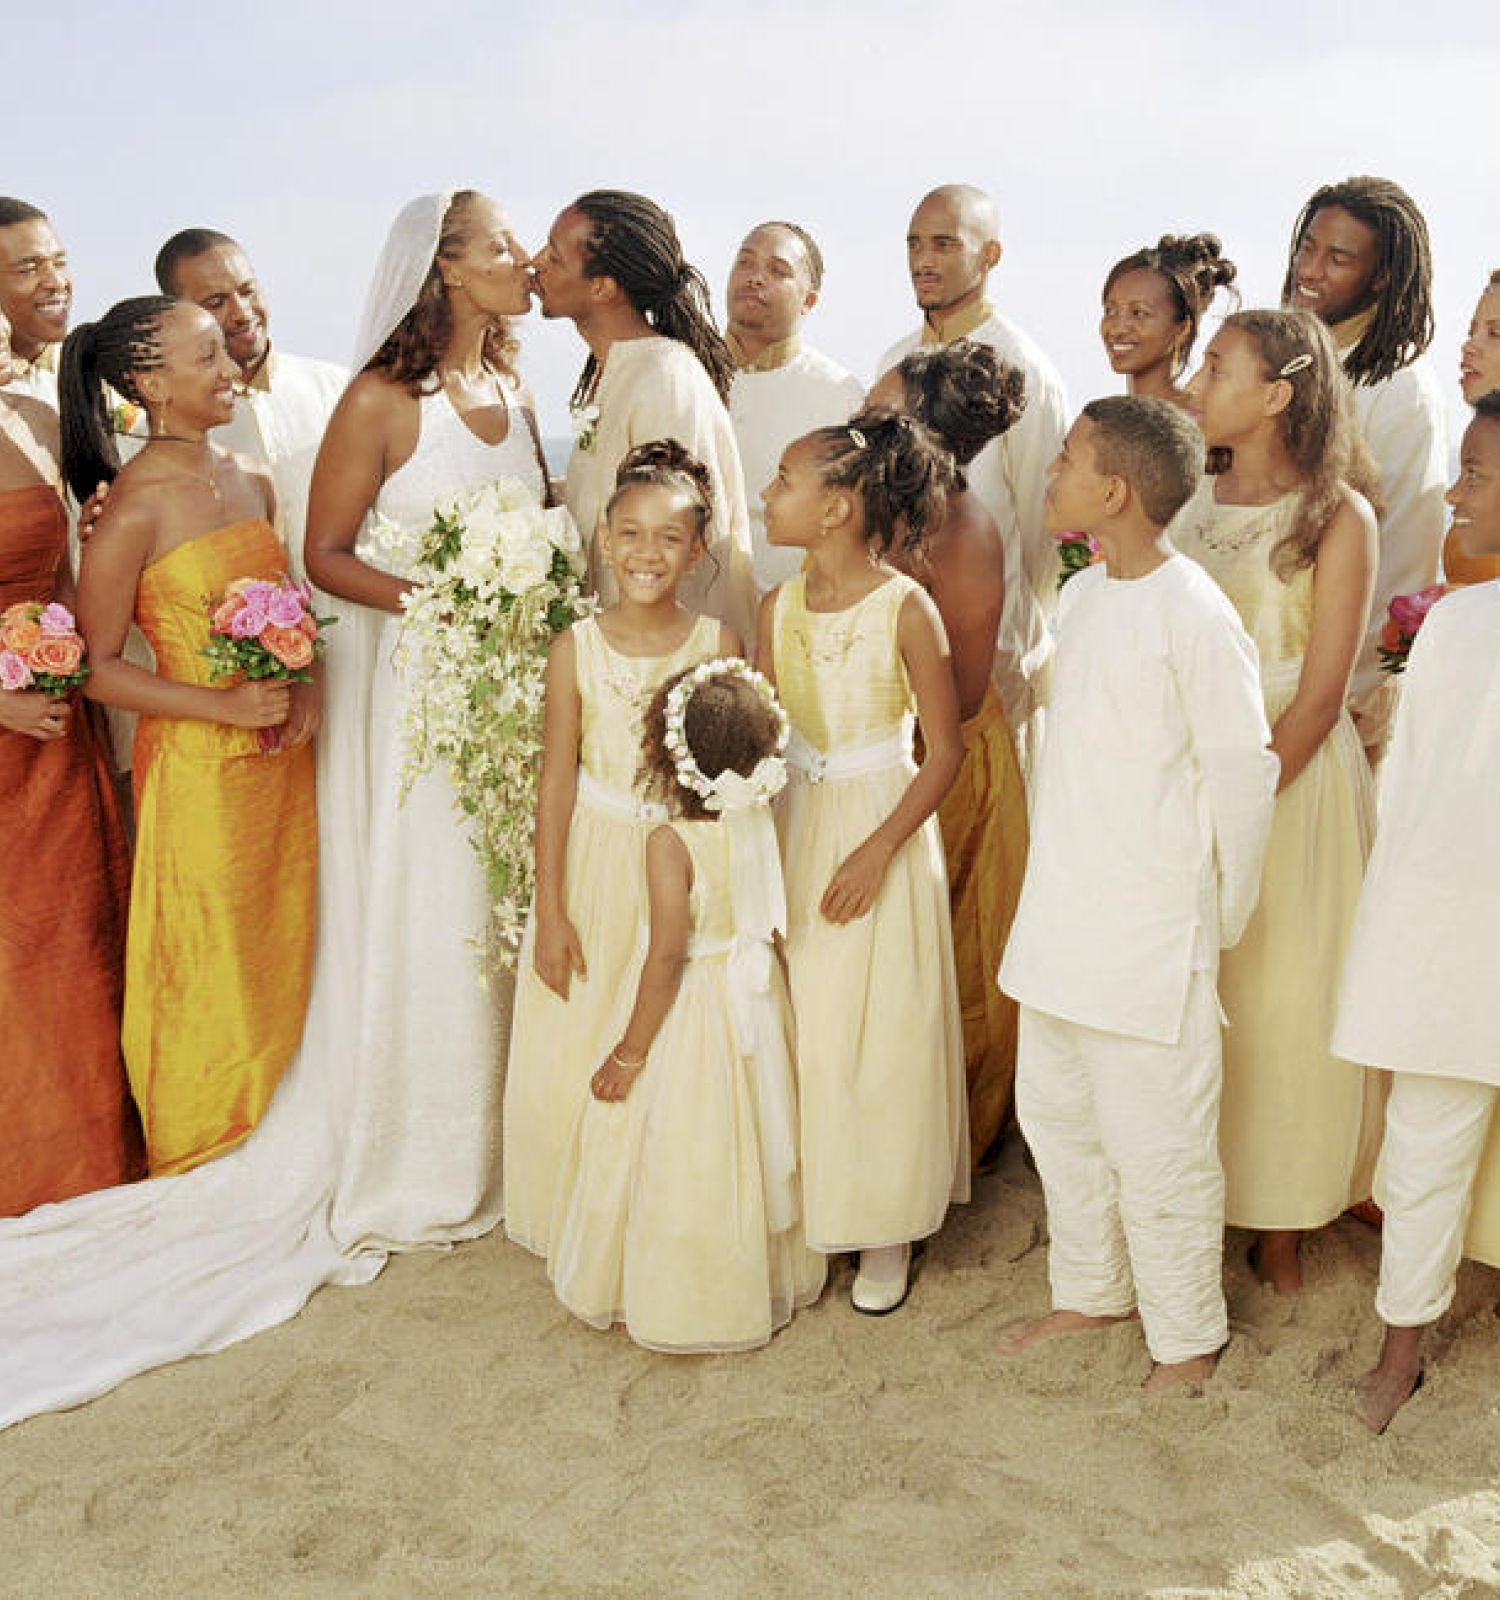 A wedding party posing on a beach with the bride and groom kissing in the center, surrounded by bridesmaids in orange and white dresses, ending the sentence.